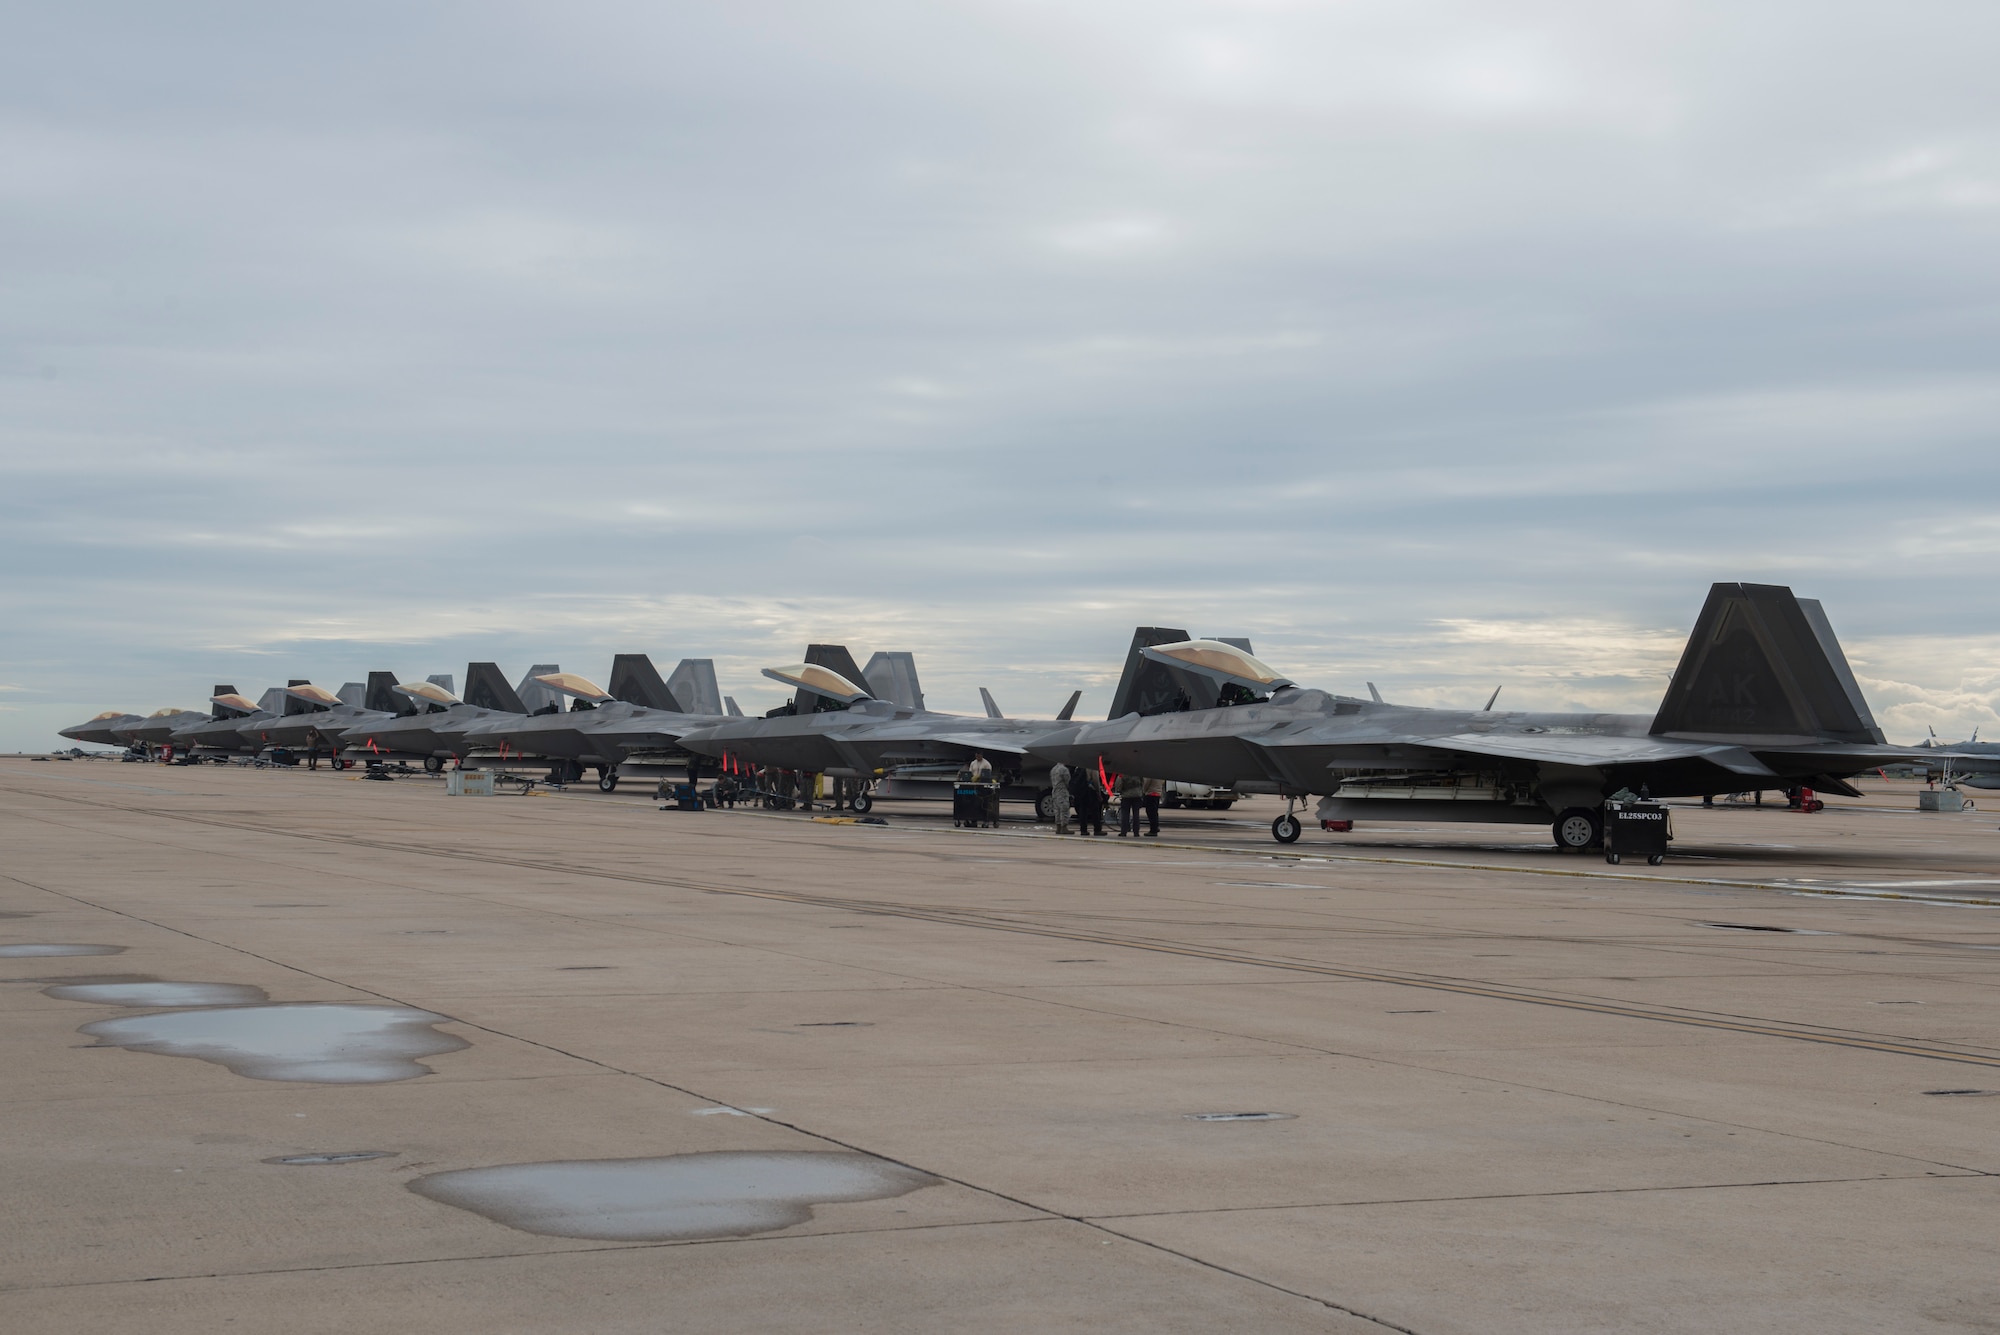 U.S. Air Force F-22 Raptors sit on the flightline prior to takeoff during in-house exercise Patriot Grizzly and joint exercise Winter Fury at Marine Corps Air Station Miramar, San Diego, Calif., Jan. 15, 2019. Both exercises enabled Joint Base Elmendorf-Richardson, Alaska, aircrew and pilots to practice standardized tactics through consistent flying. Winter Fury involved both Marine F/A-18C Hornets, and Navy F-35C Lightning II’s, partnering with F-22s to perform air-to-air combat.